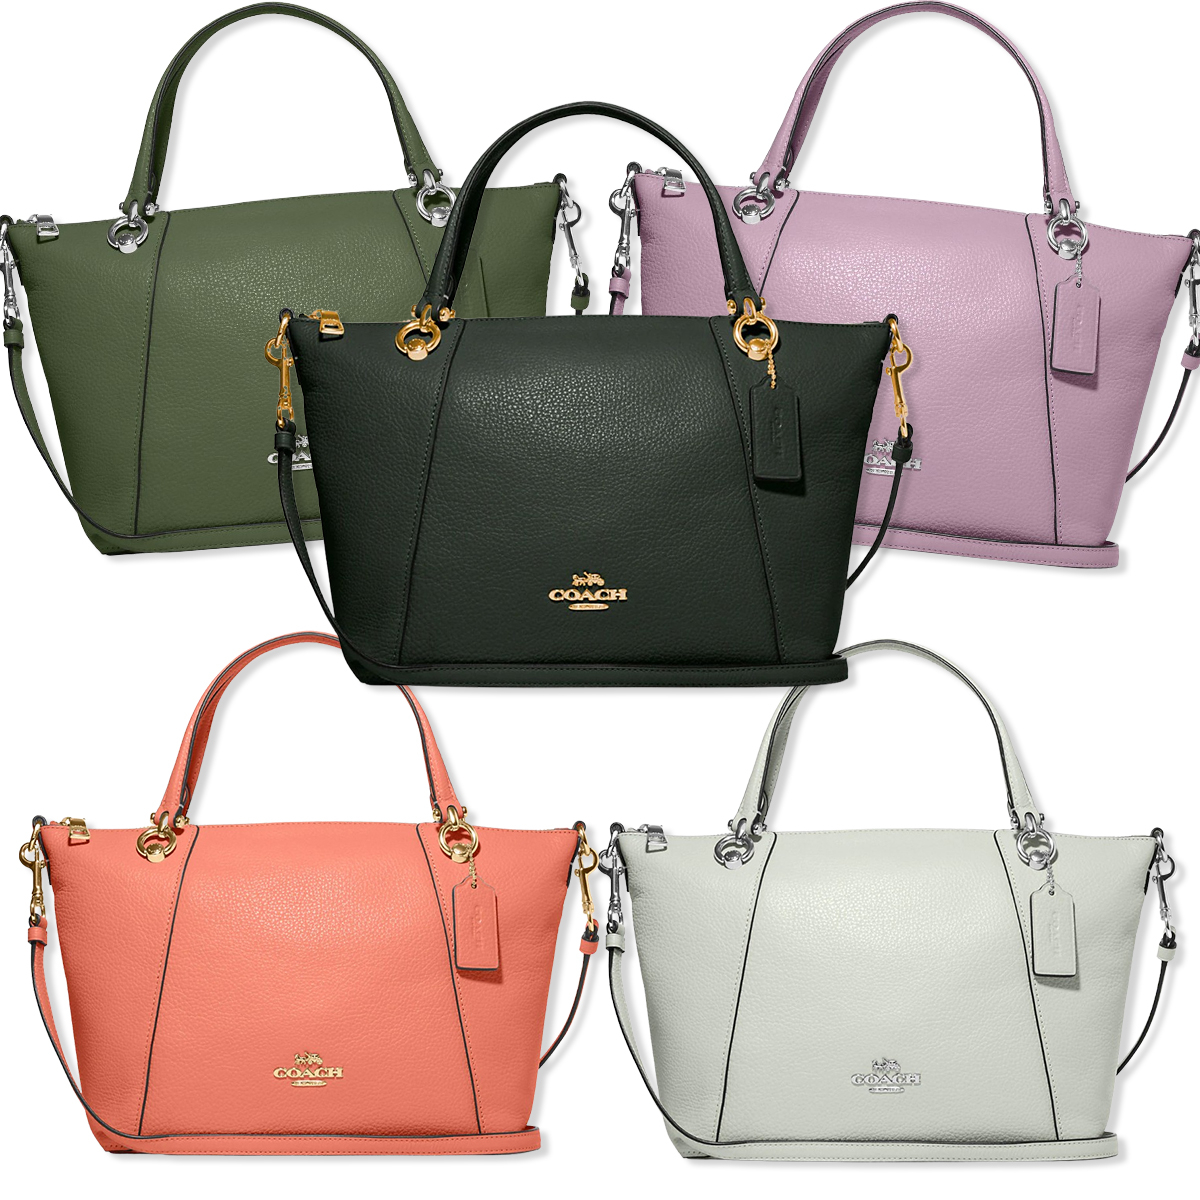 Coach Woman - Wholesale stock of branded articles - Bags, clothes, shoes,  etc